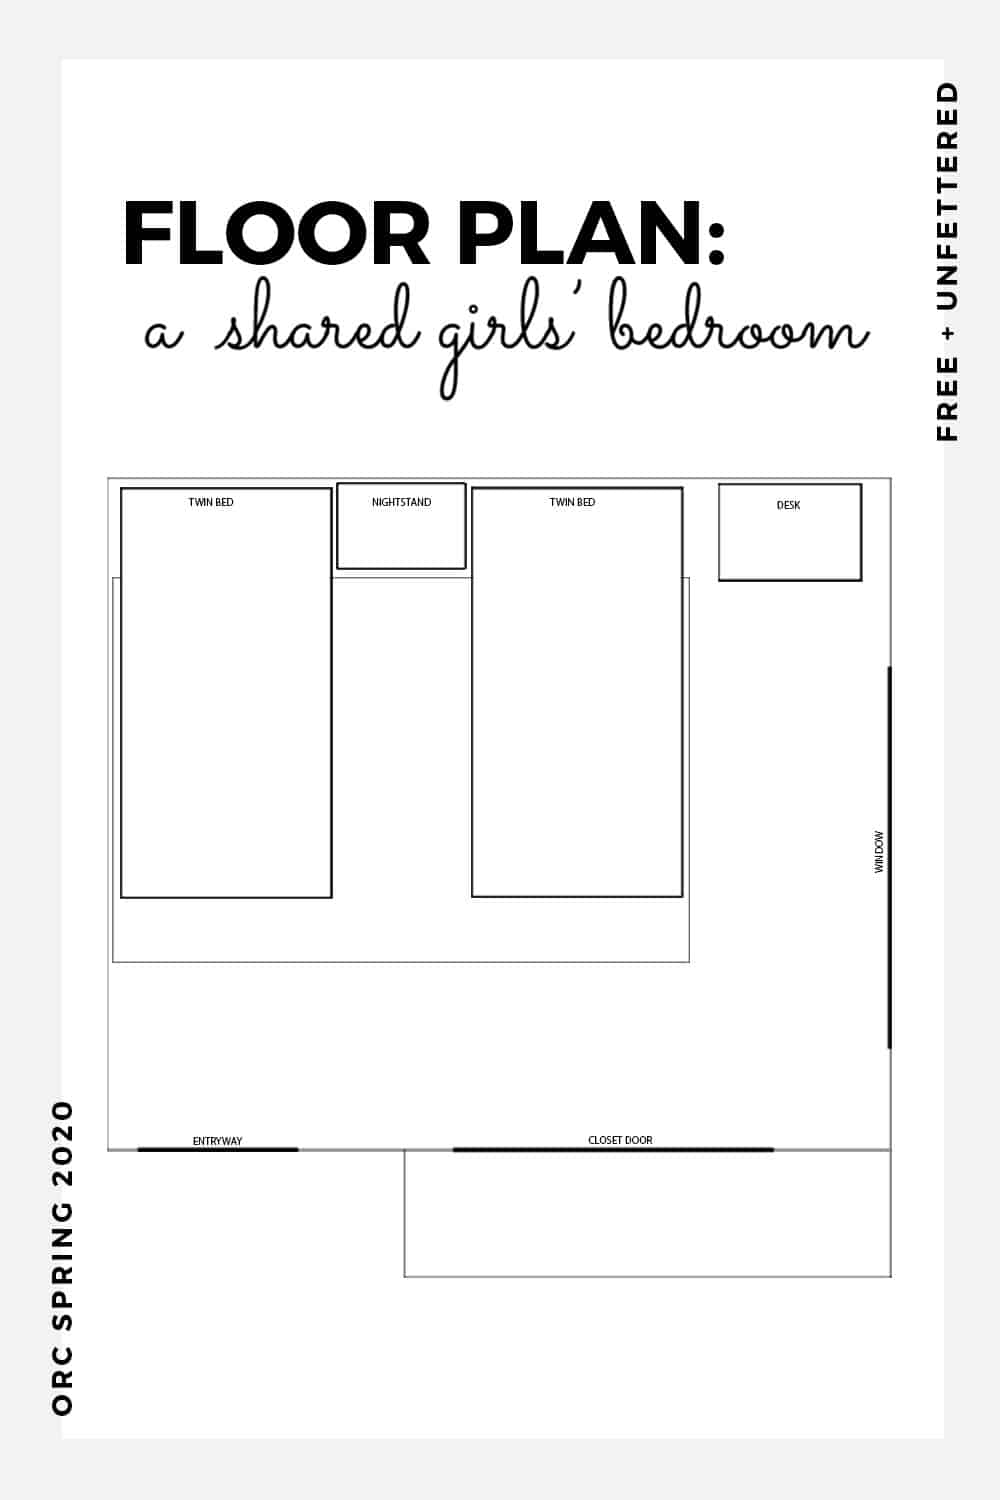 Check out our Montessori-friendly shared children's bedroom makeover as part of the Spring 2020 One Room Challenge! #orc #designingwithkids #kidsbedroom #childfriendlydesign